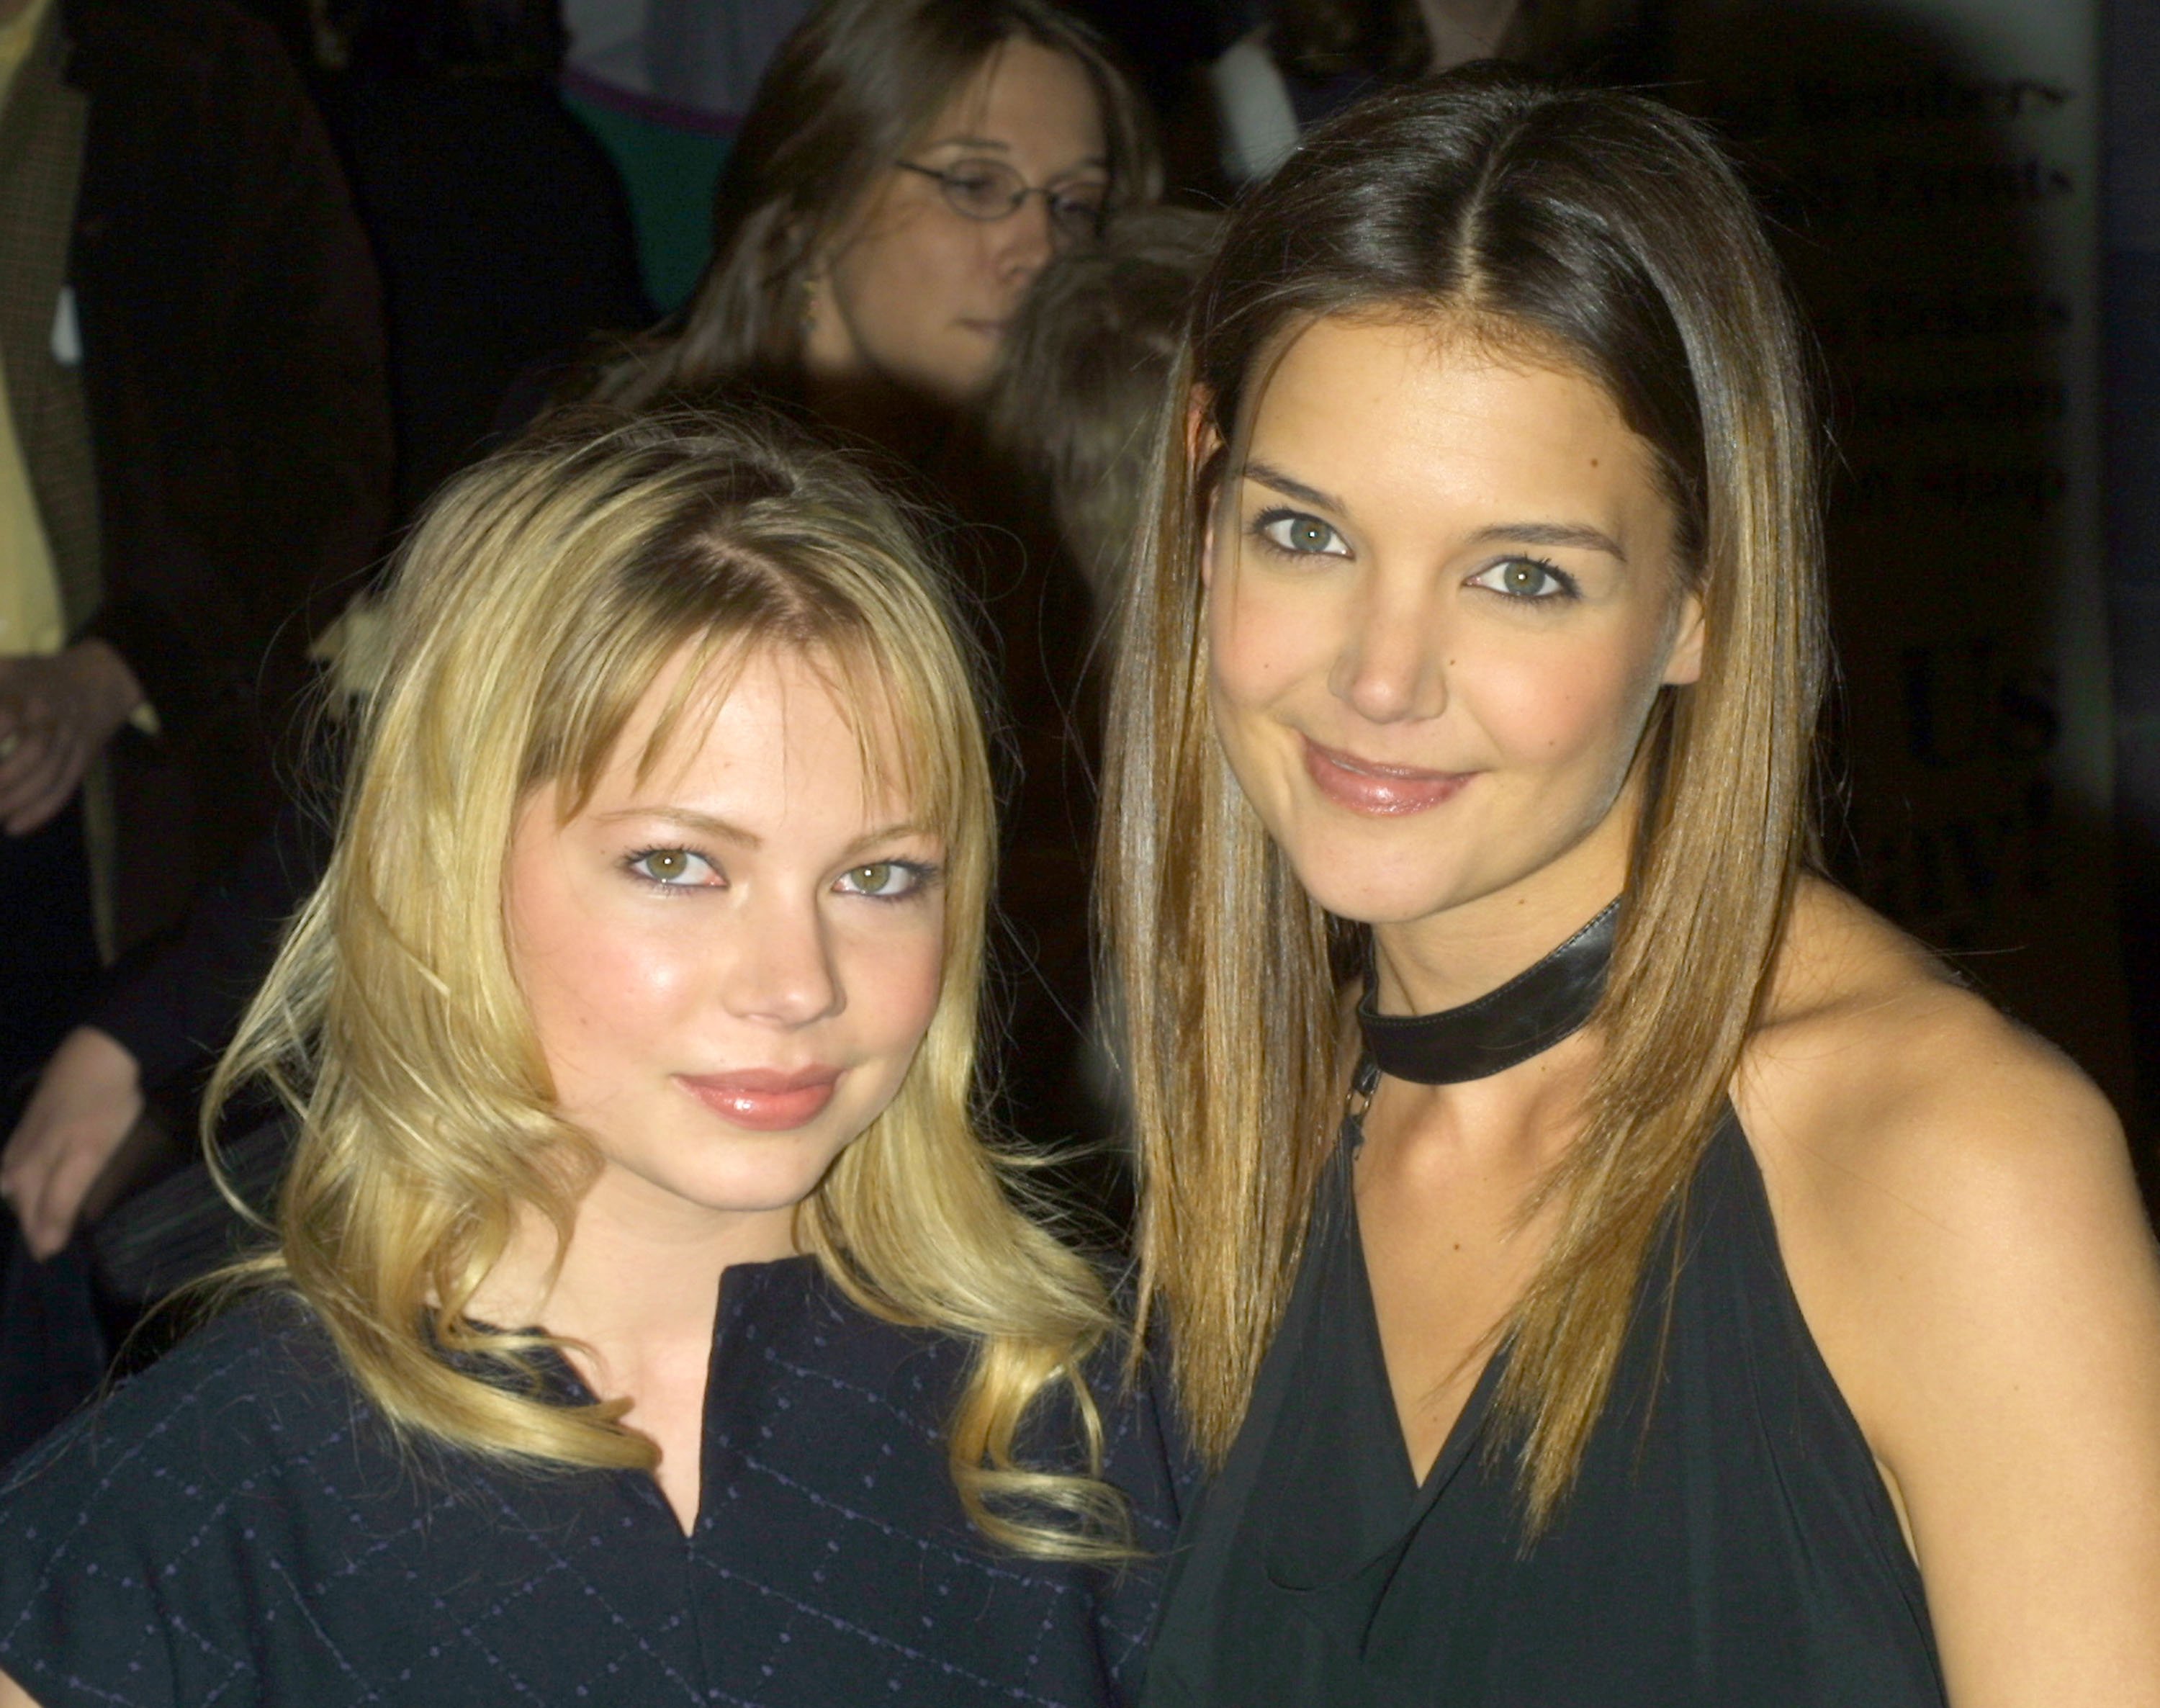 Michelle Williams & Katie Holmes during a celebration for the 100th episode of 'Dawson's Creek'